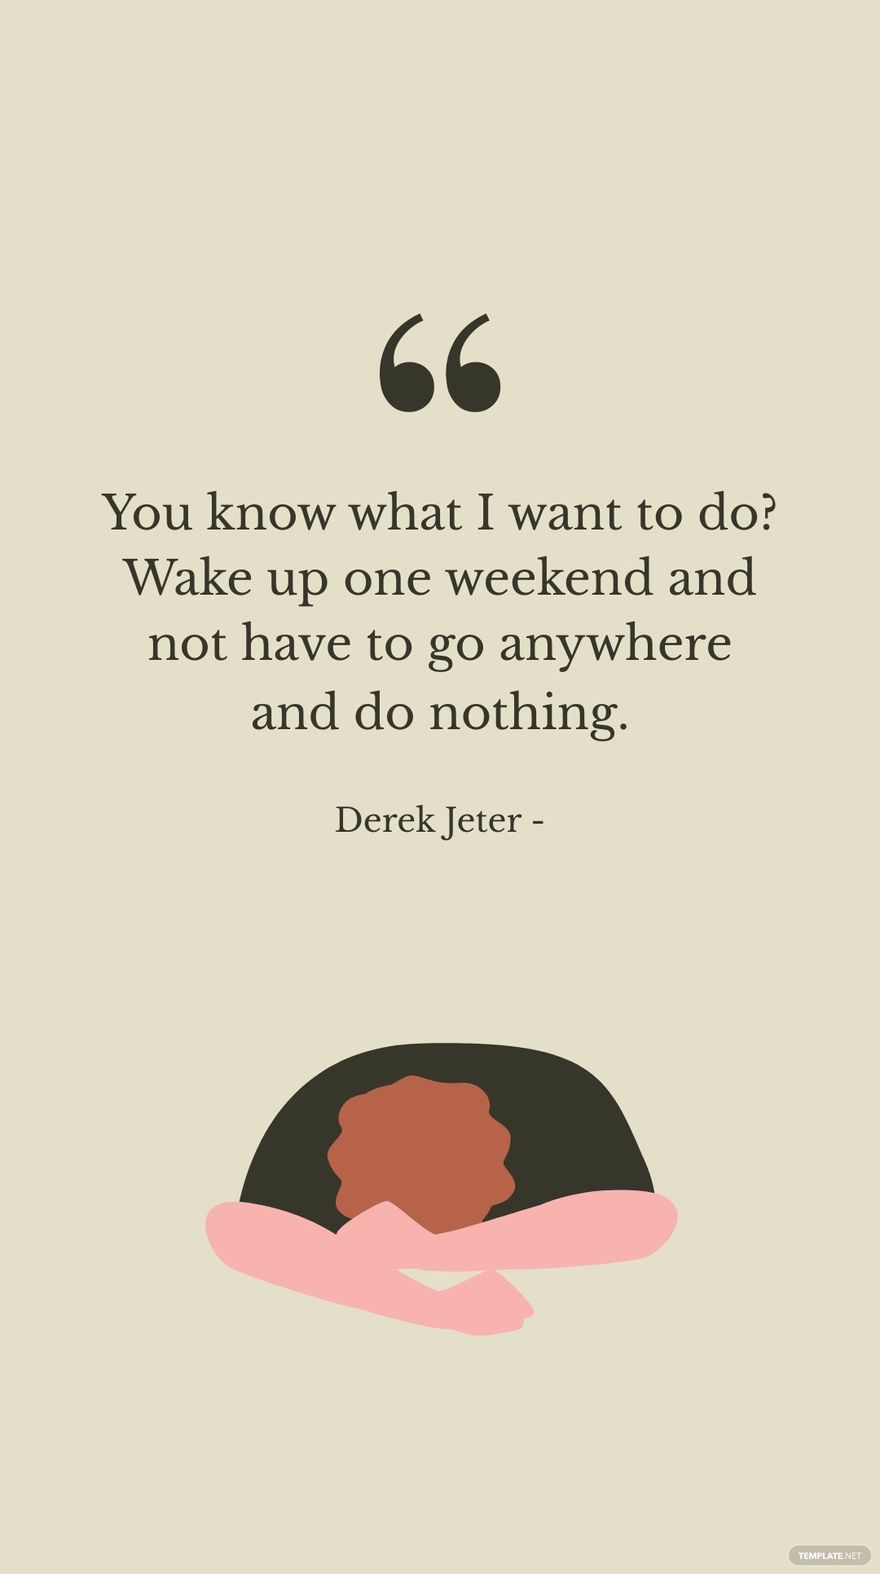 Derek Jeter - You know what I want to do? Wake up one weekend and not have to go anywhere and do nothing.